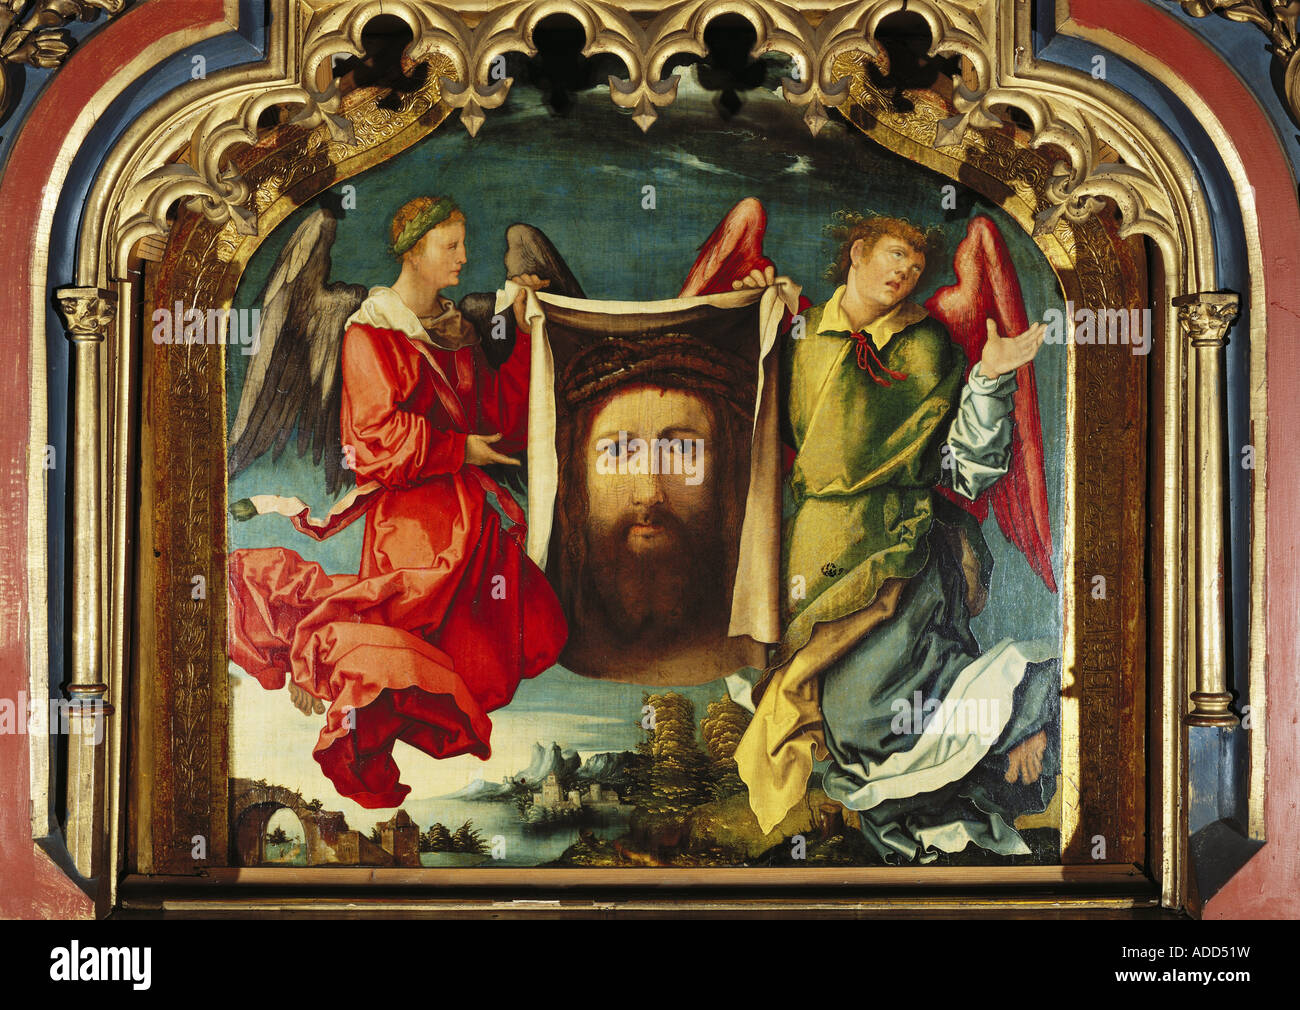 fine arts, Huber, Wolf (circa 1485 - 1553), 'Wolf-Huber-Altar', predella painting, angels with Veil of Veronica, 1521, Saint Nicholas cathedral, Feldkirch, Artist's Copyright has not to be cleared Stock Photo